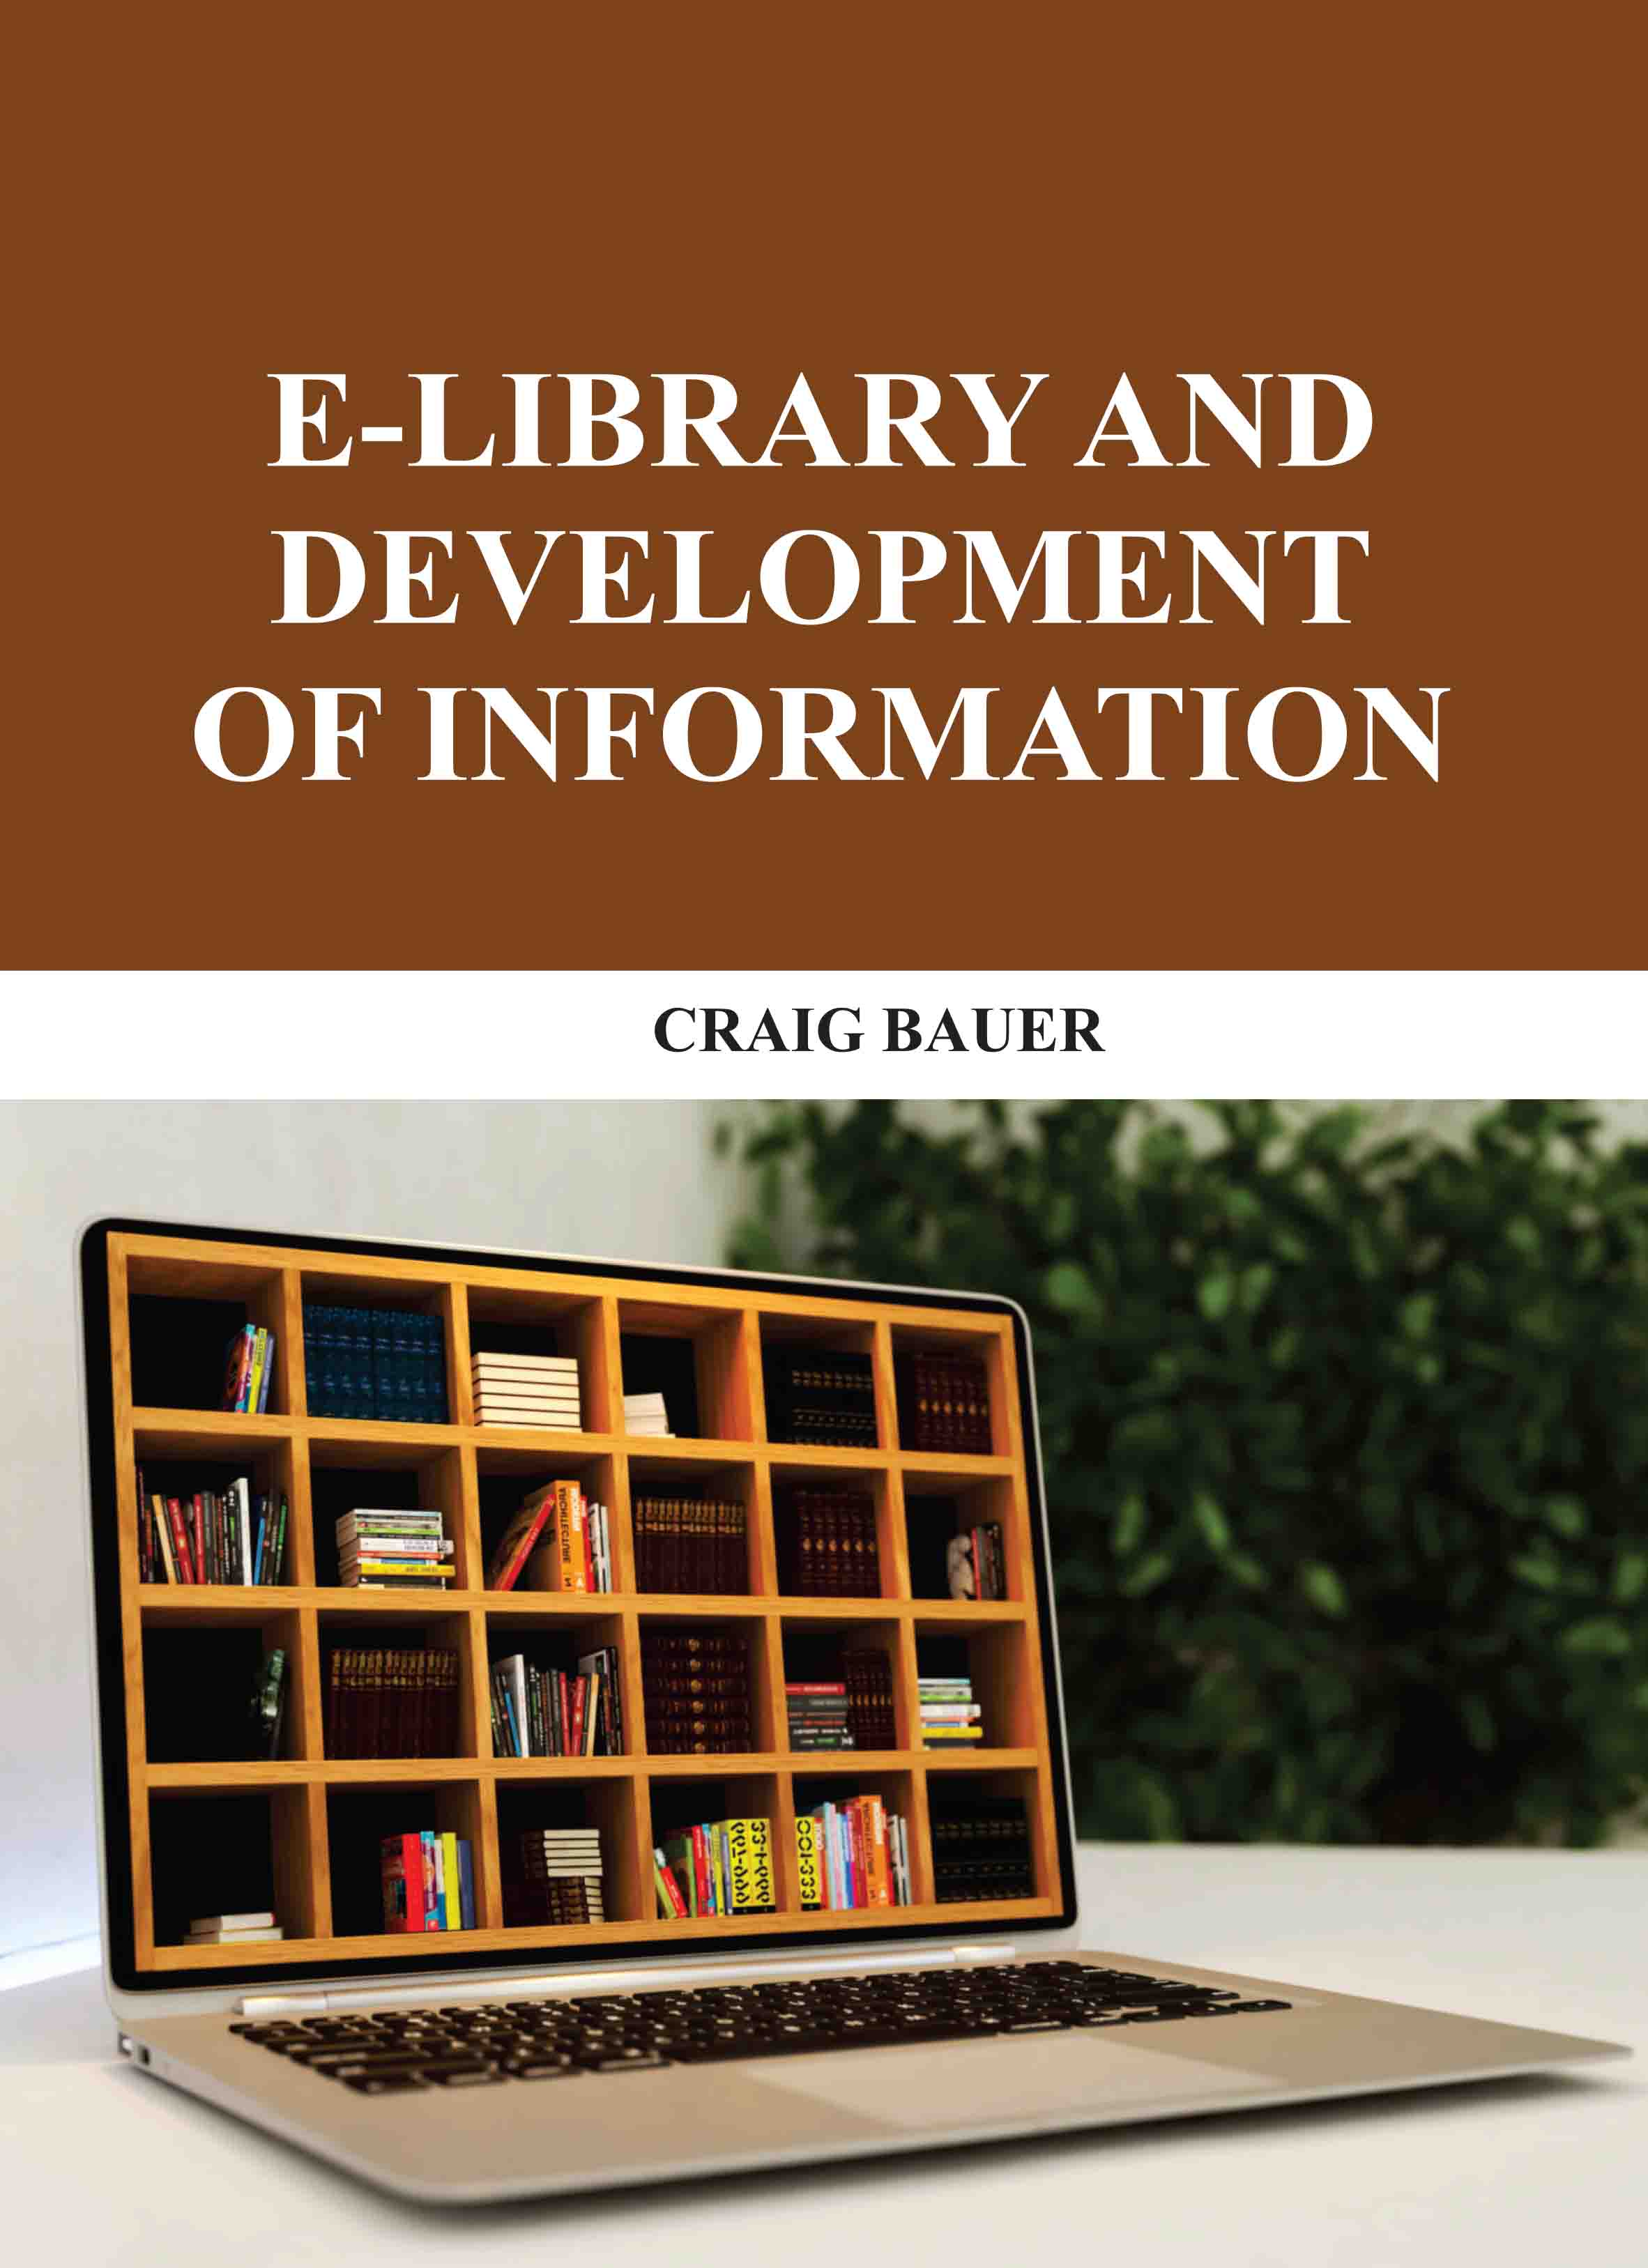 Elibrary and Development of Information